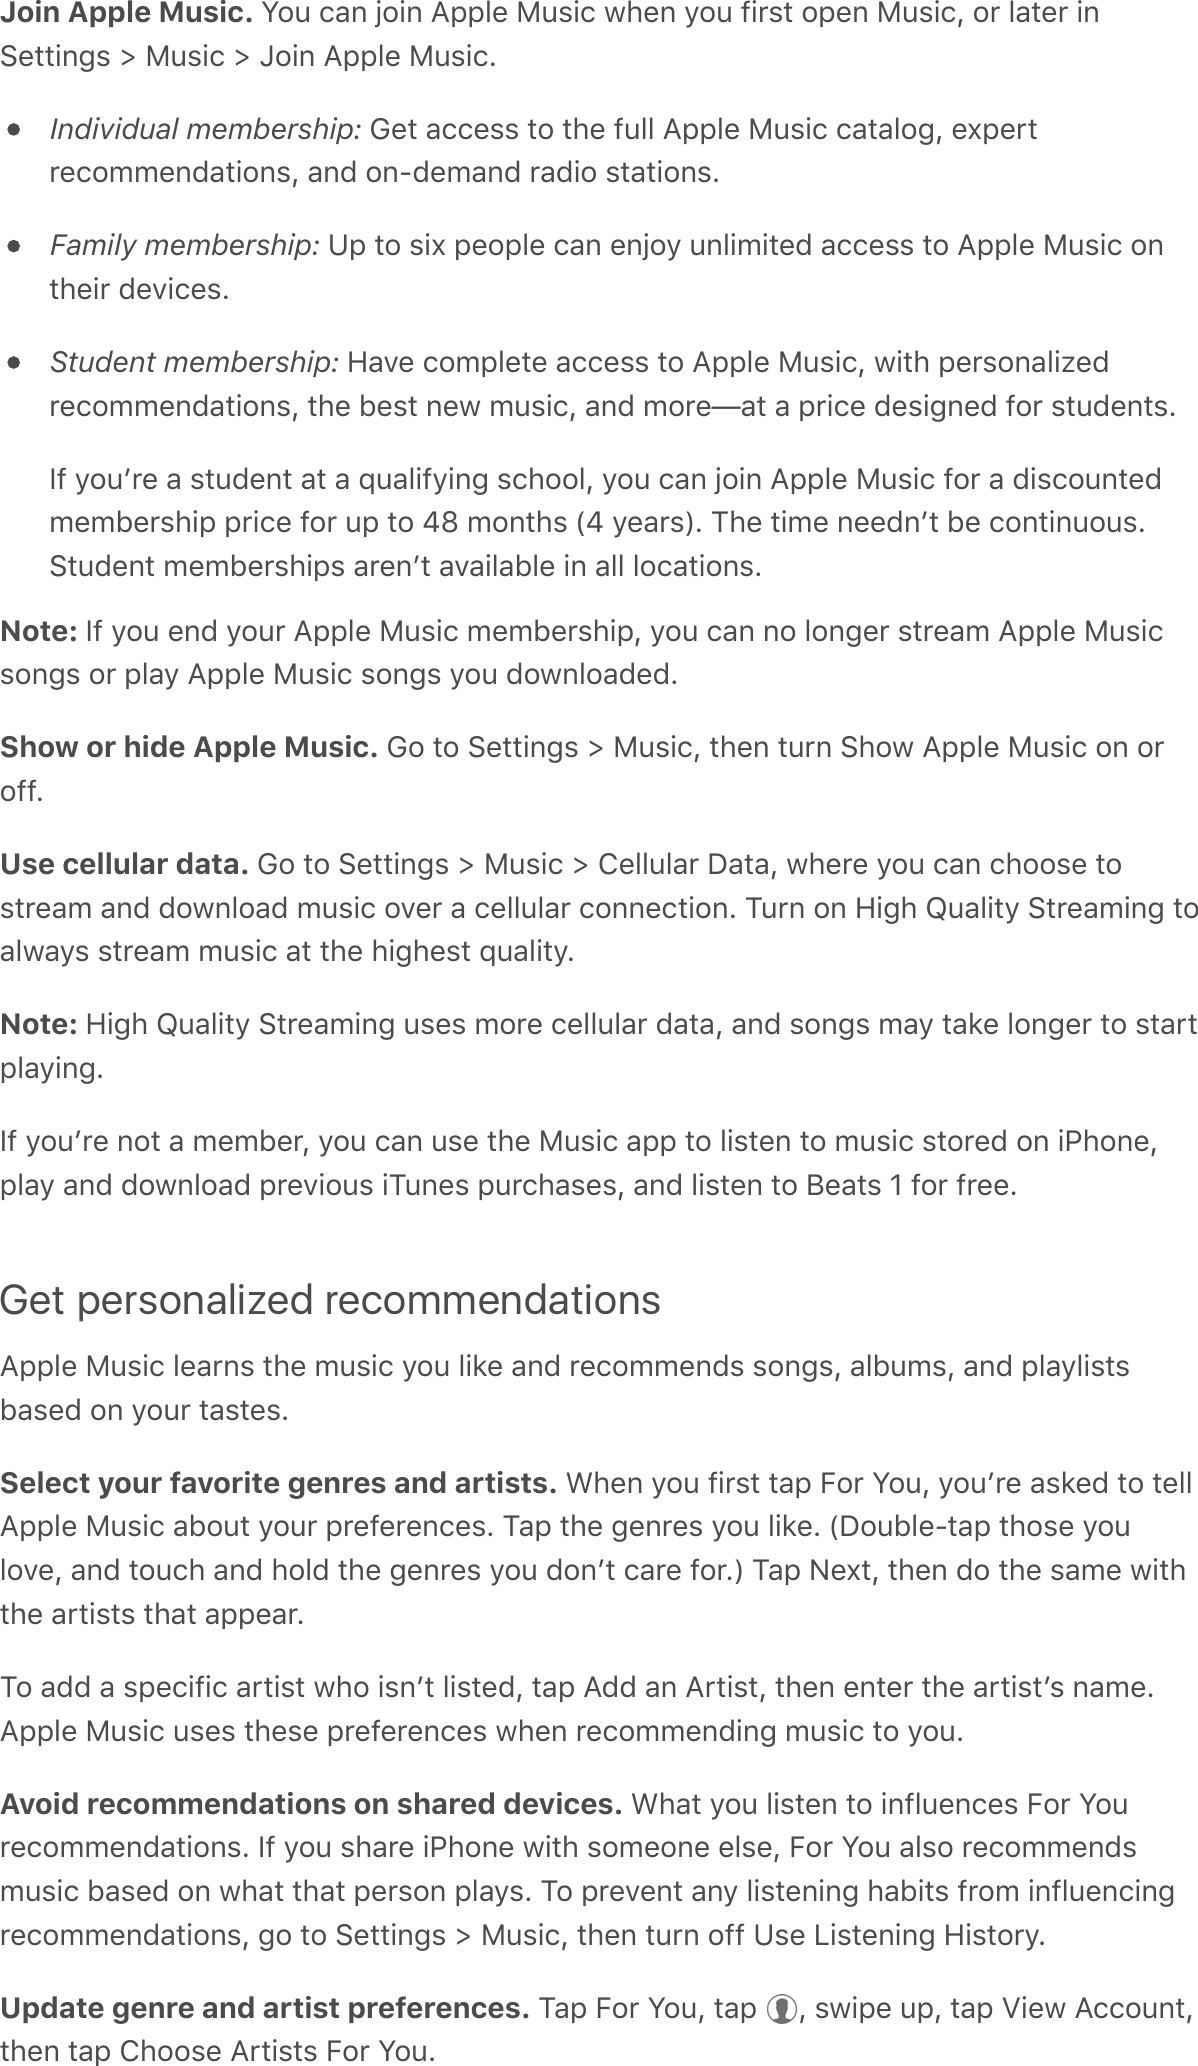 Join Apple Music. You can join Apple Music when you first open Music, or later inSettings &gt; Music &gt; Join Apple Music.Individual membership: Get access to the full Apple Music catalog, expertrecommendations, and on-demand radio stations.Family membership: Up to six people can enjoy unlimited access to Apple Music ontheir devices.Student membership: Have complete access to Apple Music, with personalizedrecommendations, the best new music, and more—at a price designed for students.If youʼre a student at a qualifying school, you can join Apple Music for a discountedmembership price for up to 48 months (4 years). The time neednʼt be continuous.Student memberships arenʼt available in all locations.Note: If you end your Apple Music membership, you can no longer stream Apple Musicsongs or play Apple Music songs you downloaded.Show or hide Apple Music. Go to Settings &gt; Music, then turn Show Apple Music on oroff.Use cellular data. Go to Settings &gt; Music &gt; Cellular Data, where you can choose tostream and download music over a cellular connection. Turn on High Quality Streaming toalways stream music at the highest quality.Note: High Quality Streaming uses more cellular data, and songs may take longer to startplaying.If youʼre not a member, you can use the Music app to listen to music stored on iPhone,play and download previous iTunes purchases, and listen to Beats 1 for free.Get personalized recommendationsApple Music learns the music you like and recommends songs, albums, and playlistsbased on your tastes.Select your favorite genres and artists. When you first tap For You, youʼre asked to tellApple Music about your preferences. Tap the genres you like. (Double-tap those youlove, and touch and hold the genres you donʼt care for.) Tap Next, then do the same withthe artists that appear.To add a specific artist who isnʼt listed, tap Add an Artist, then enter the artistʼs name.Apple Music uses these preferences when recommending music to you.Avoid recommendations on shared devices. What you listen to influences For Yourecommendations. If you share iPhone with someone else, For You also recommendsmusic based on what that person plays. To prevent any listening habits from influencingrecommendations, go to Settings &gt; Music, then turn off Use Listening History.Update genre and artist preferences. Tap For You, tap  , swipe up, tap View Account,then tap Choose Artists For You.